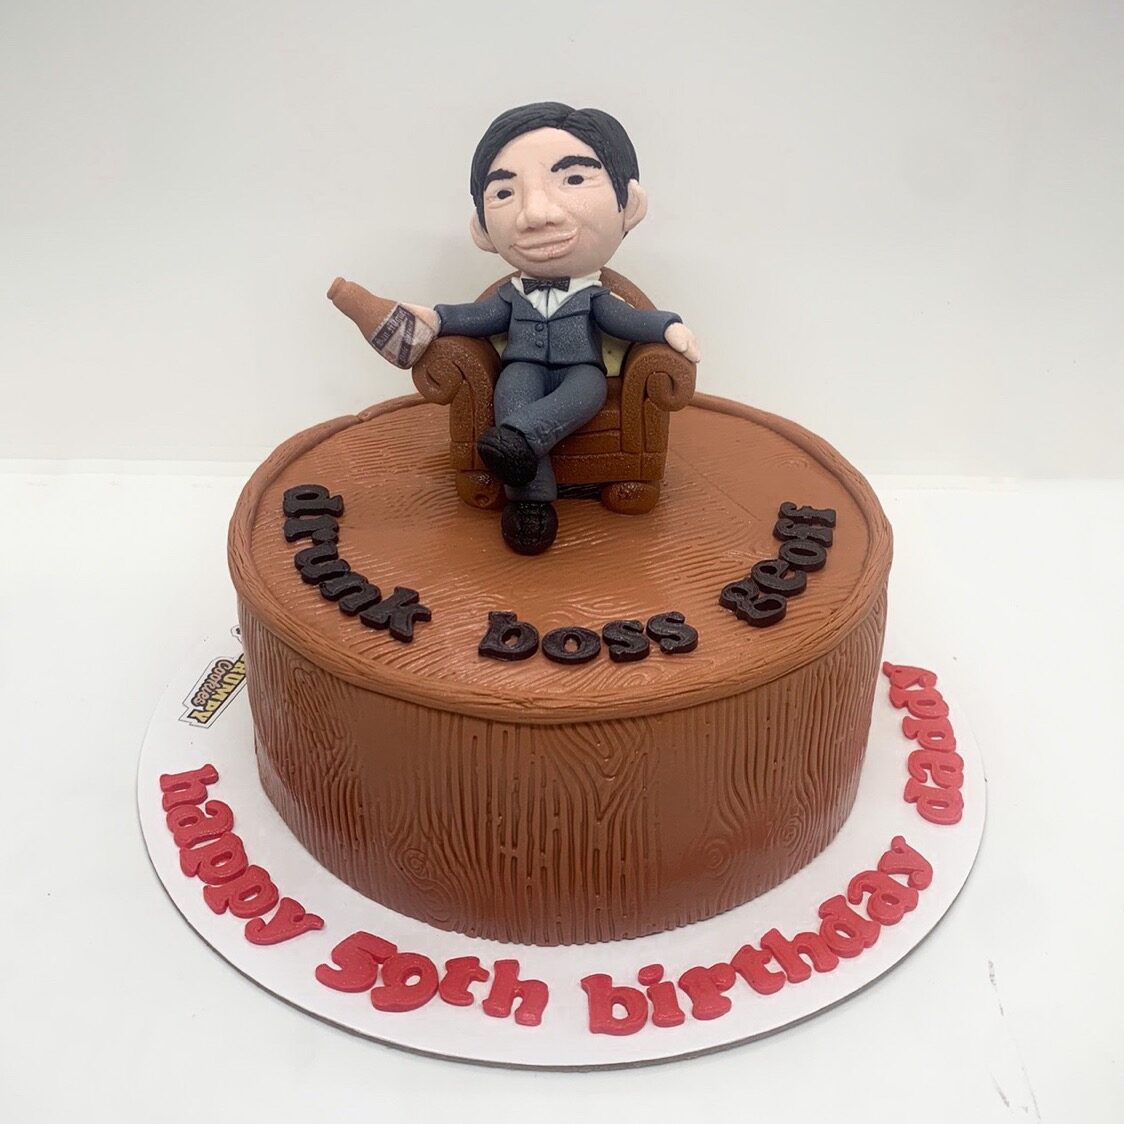 Boss Theme Cakes | Delivery in Gurgaon & Noida - Creme Castle